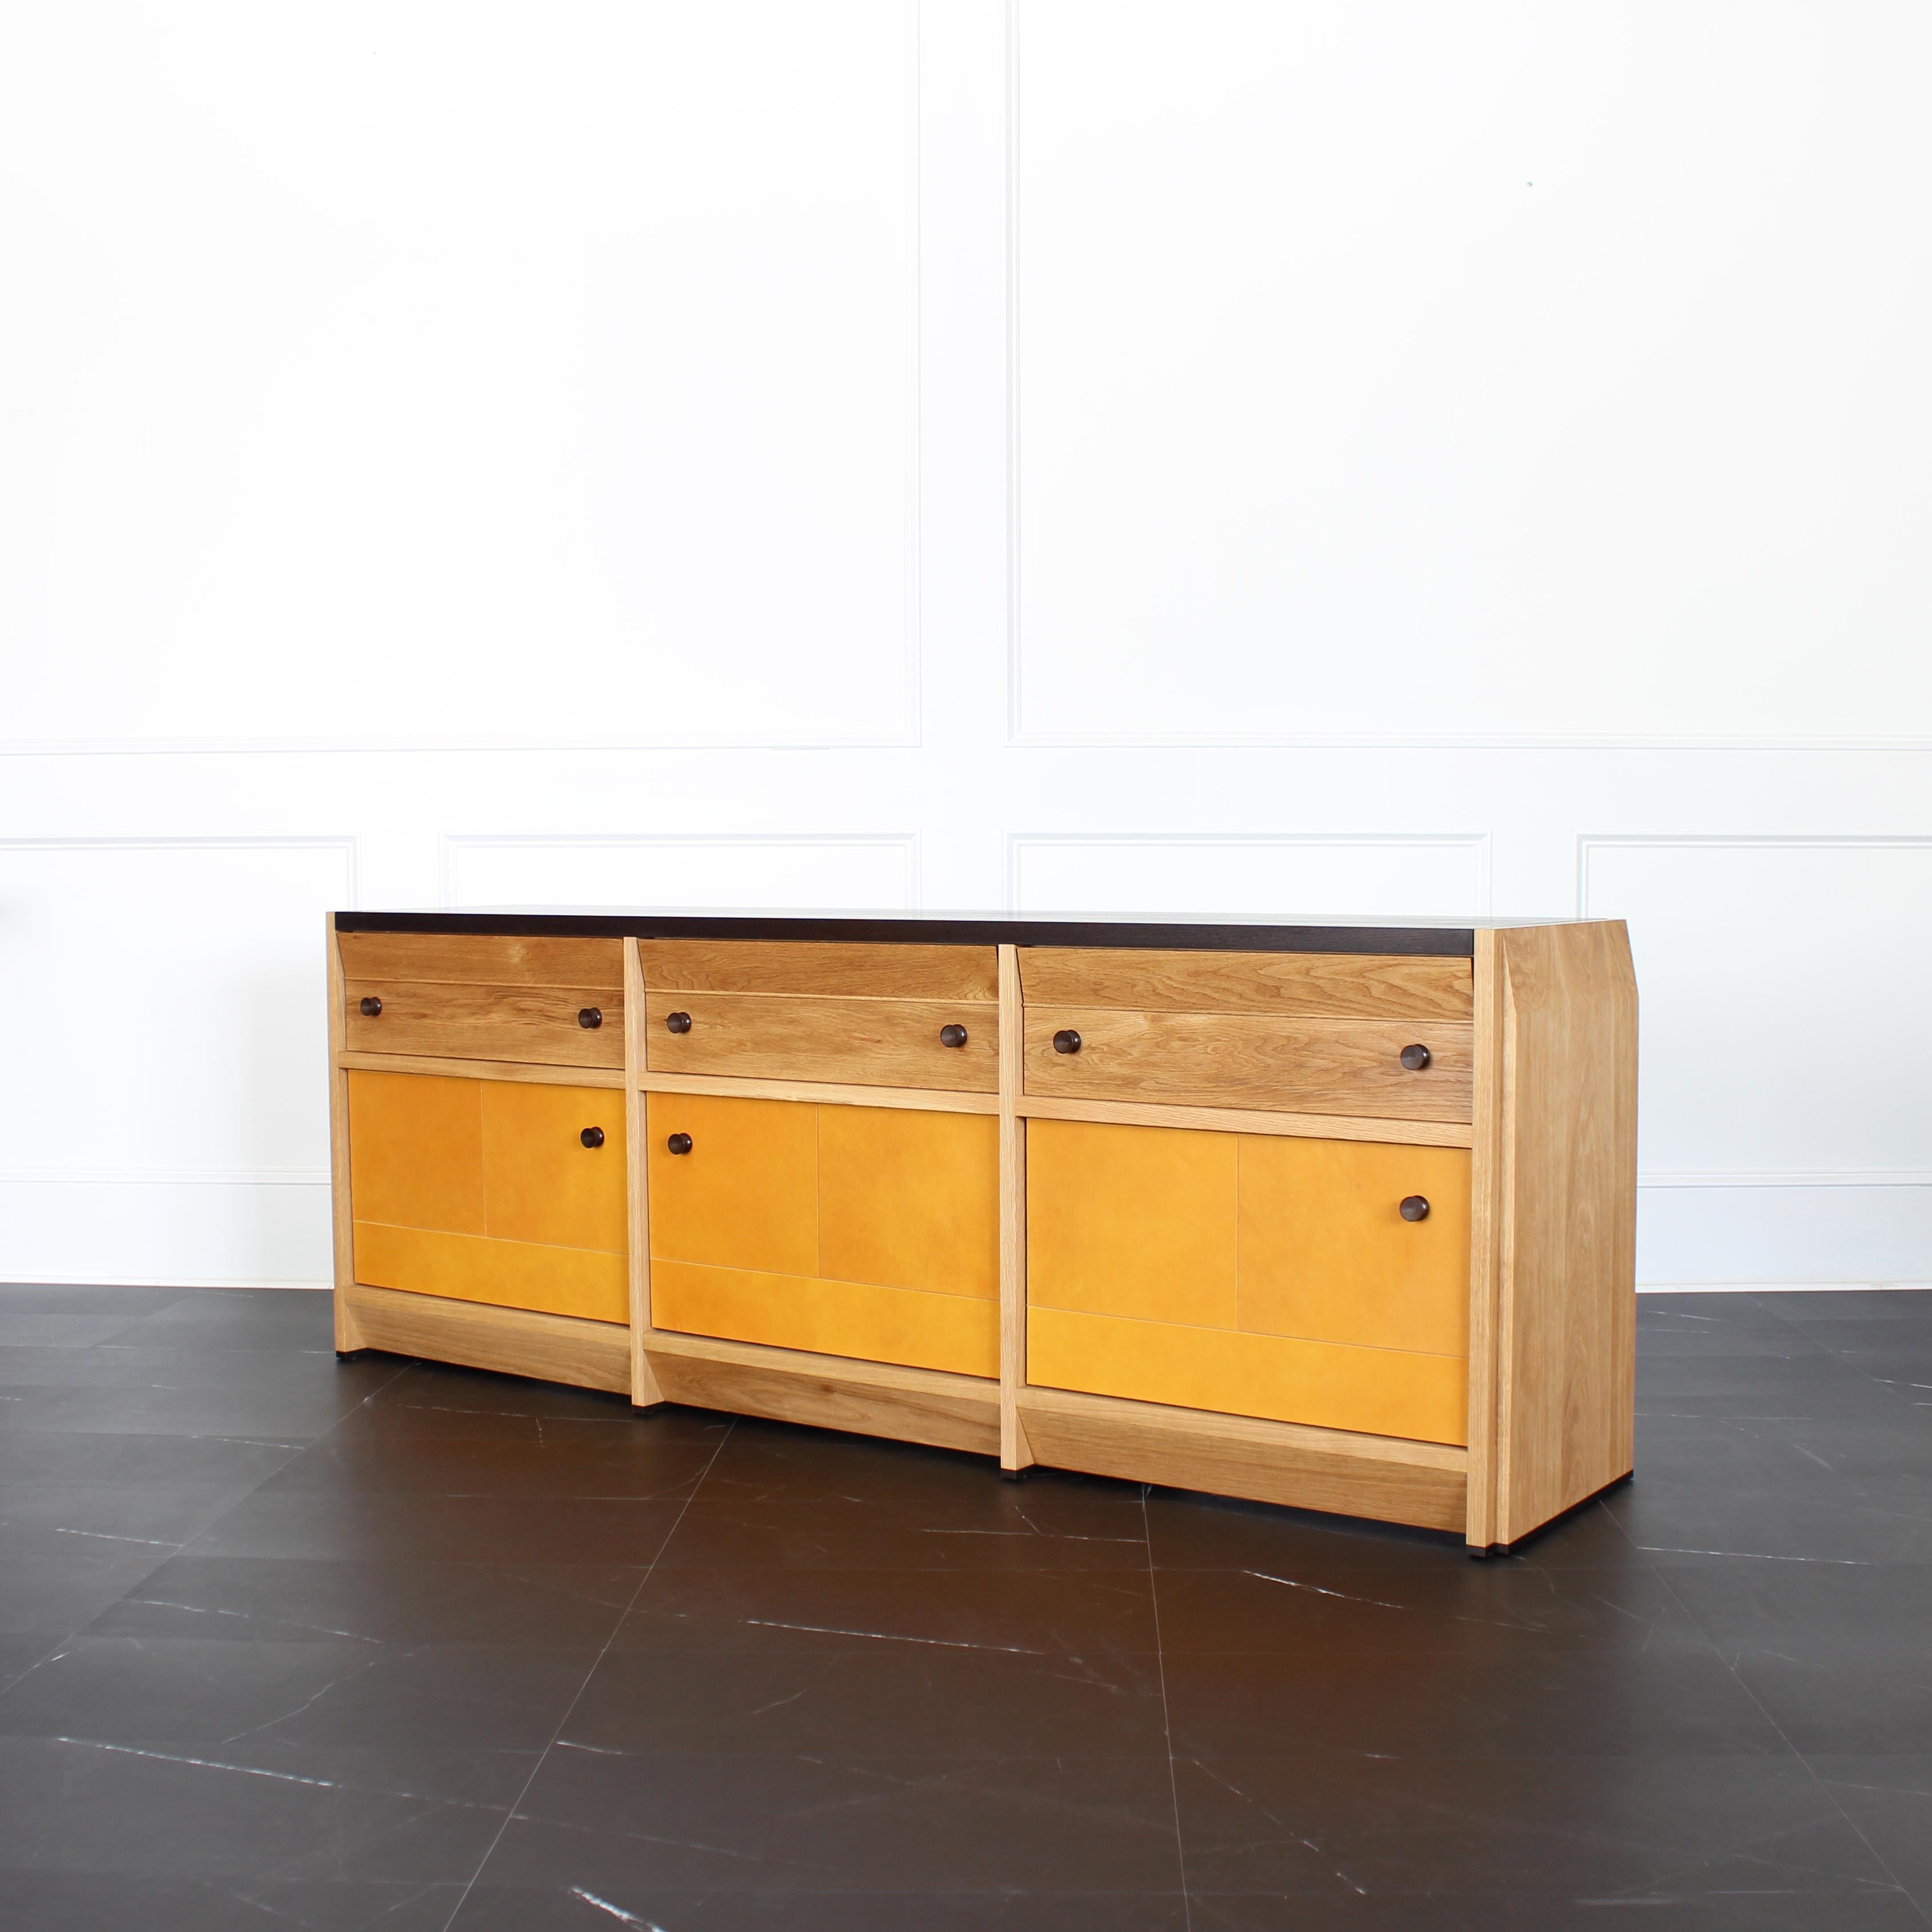 The Octavia Credenza by Crump and Kwash 

Features a solid wood case / oiled or acrylic finish / patinated solid brass pulls / premium, full extension, soft close drawer slides / solid maple, dovetailed drawer boxes / veg tan leather door panels /